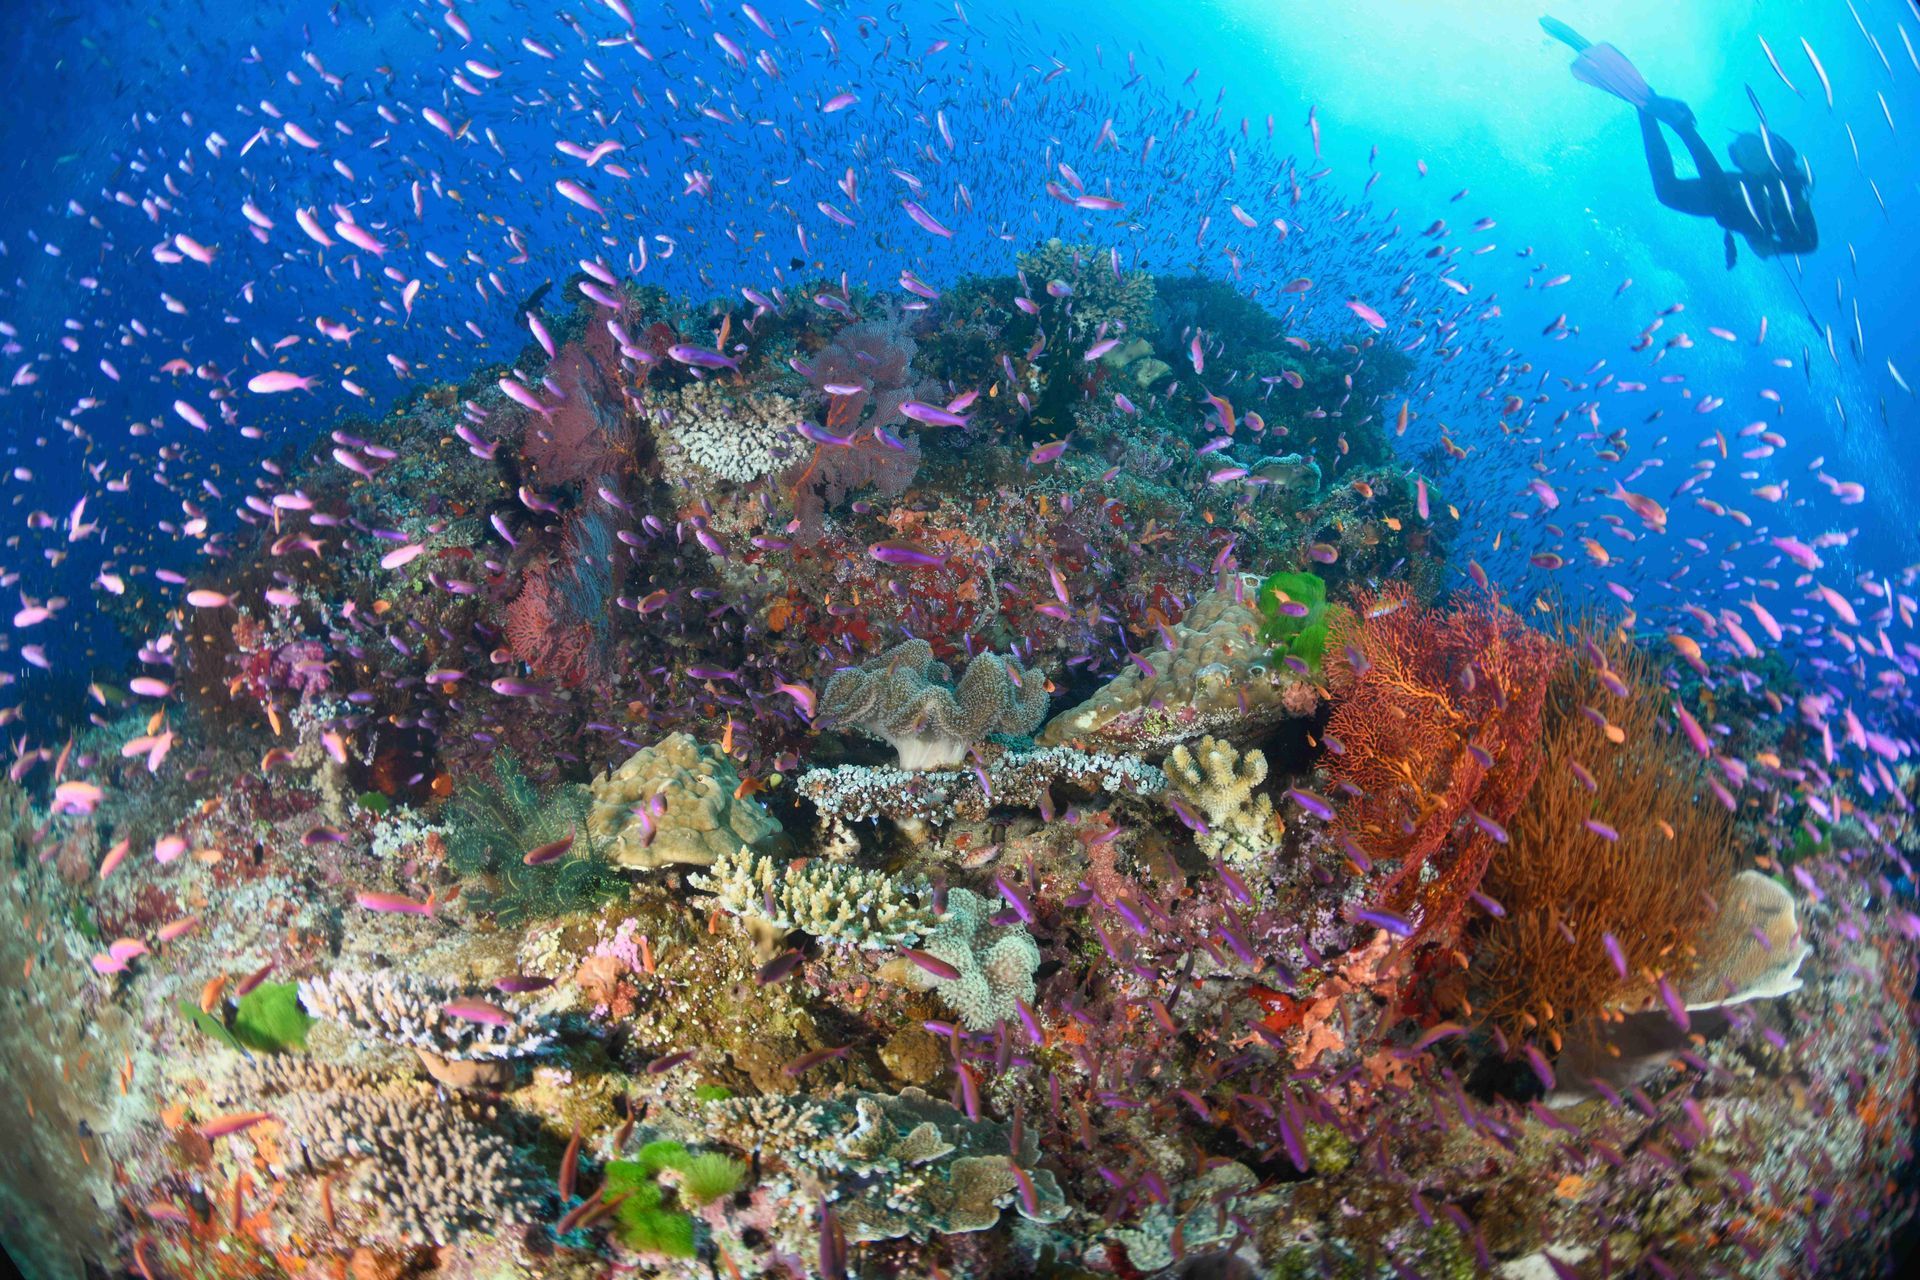 A soft coral and hard coral covered reef exploding with small purple fish in the blue water with a diver in the background 